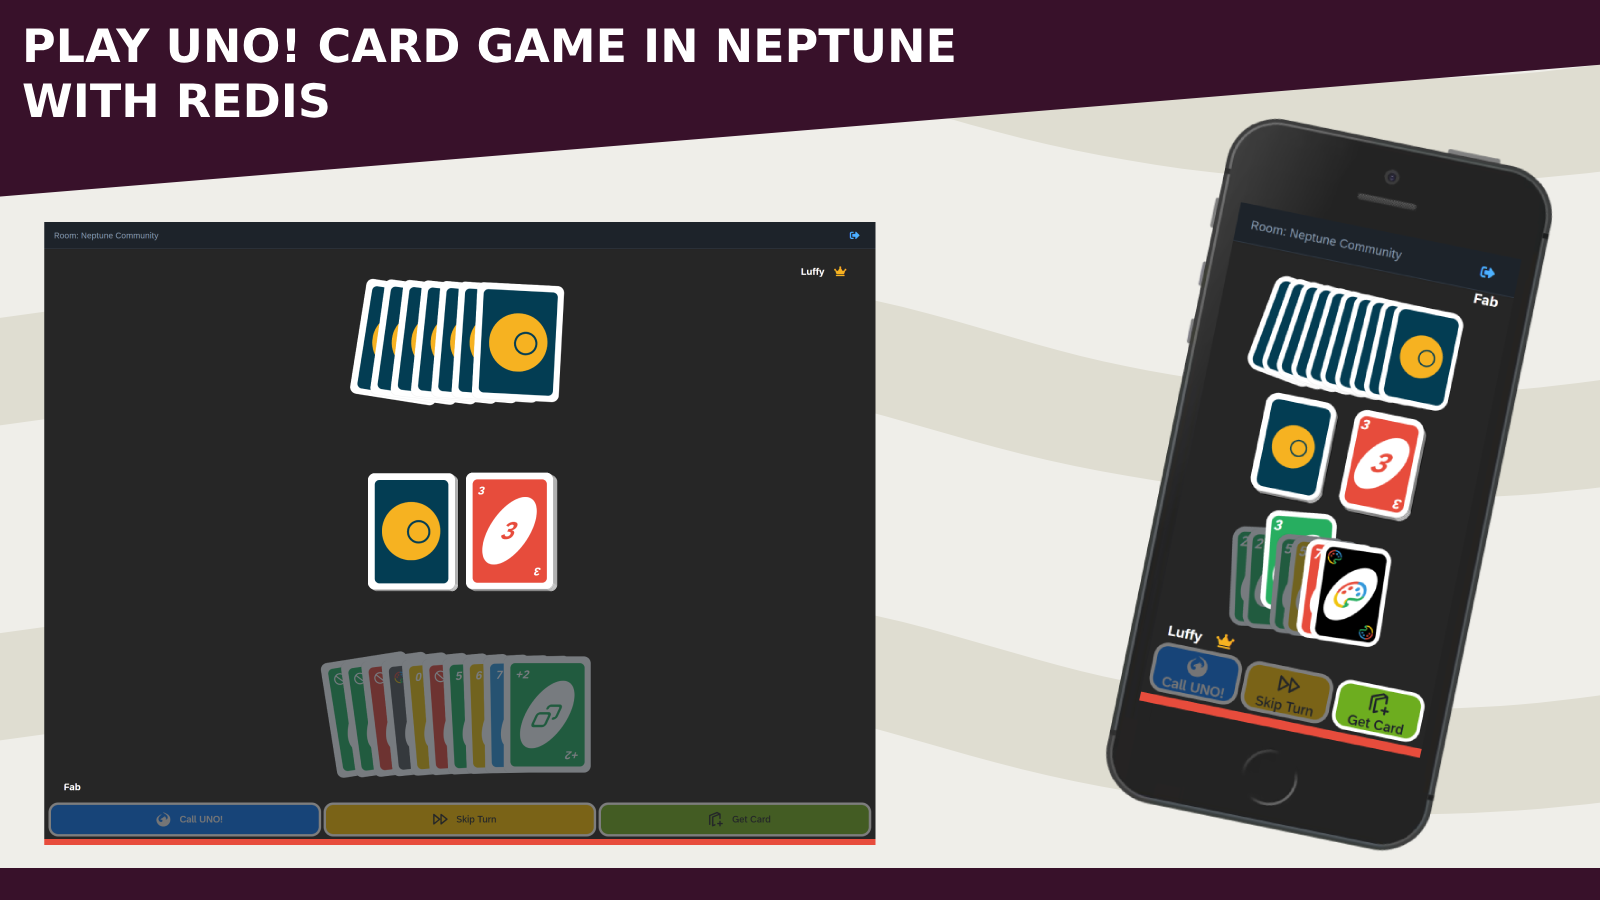 Play UNO! Card Game in Neptune with Redis - GitHub Project Available